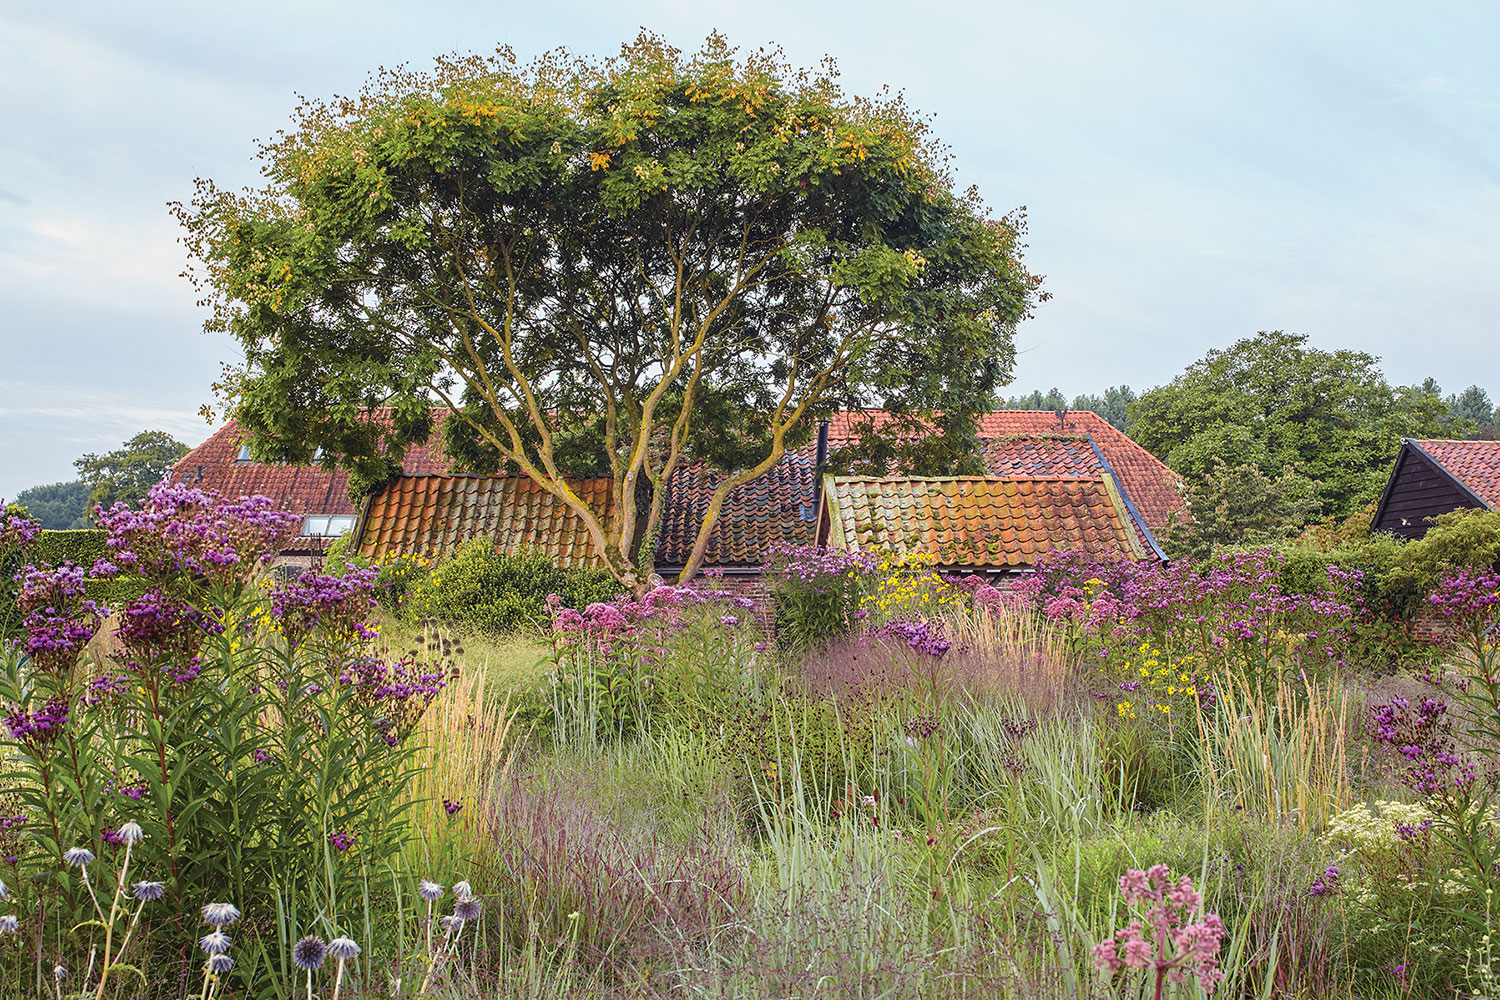 Piet Oudolf gardens and farm buildings at Hummelo